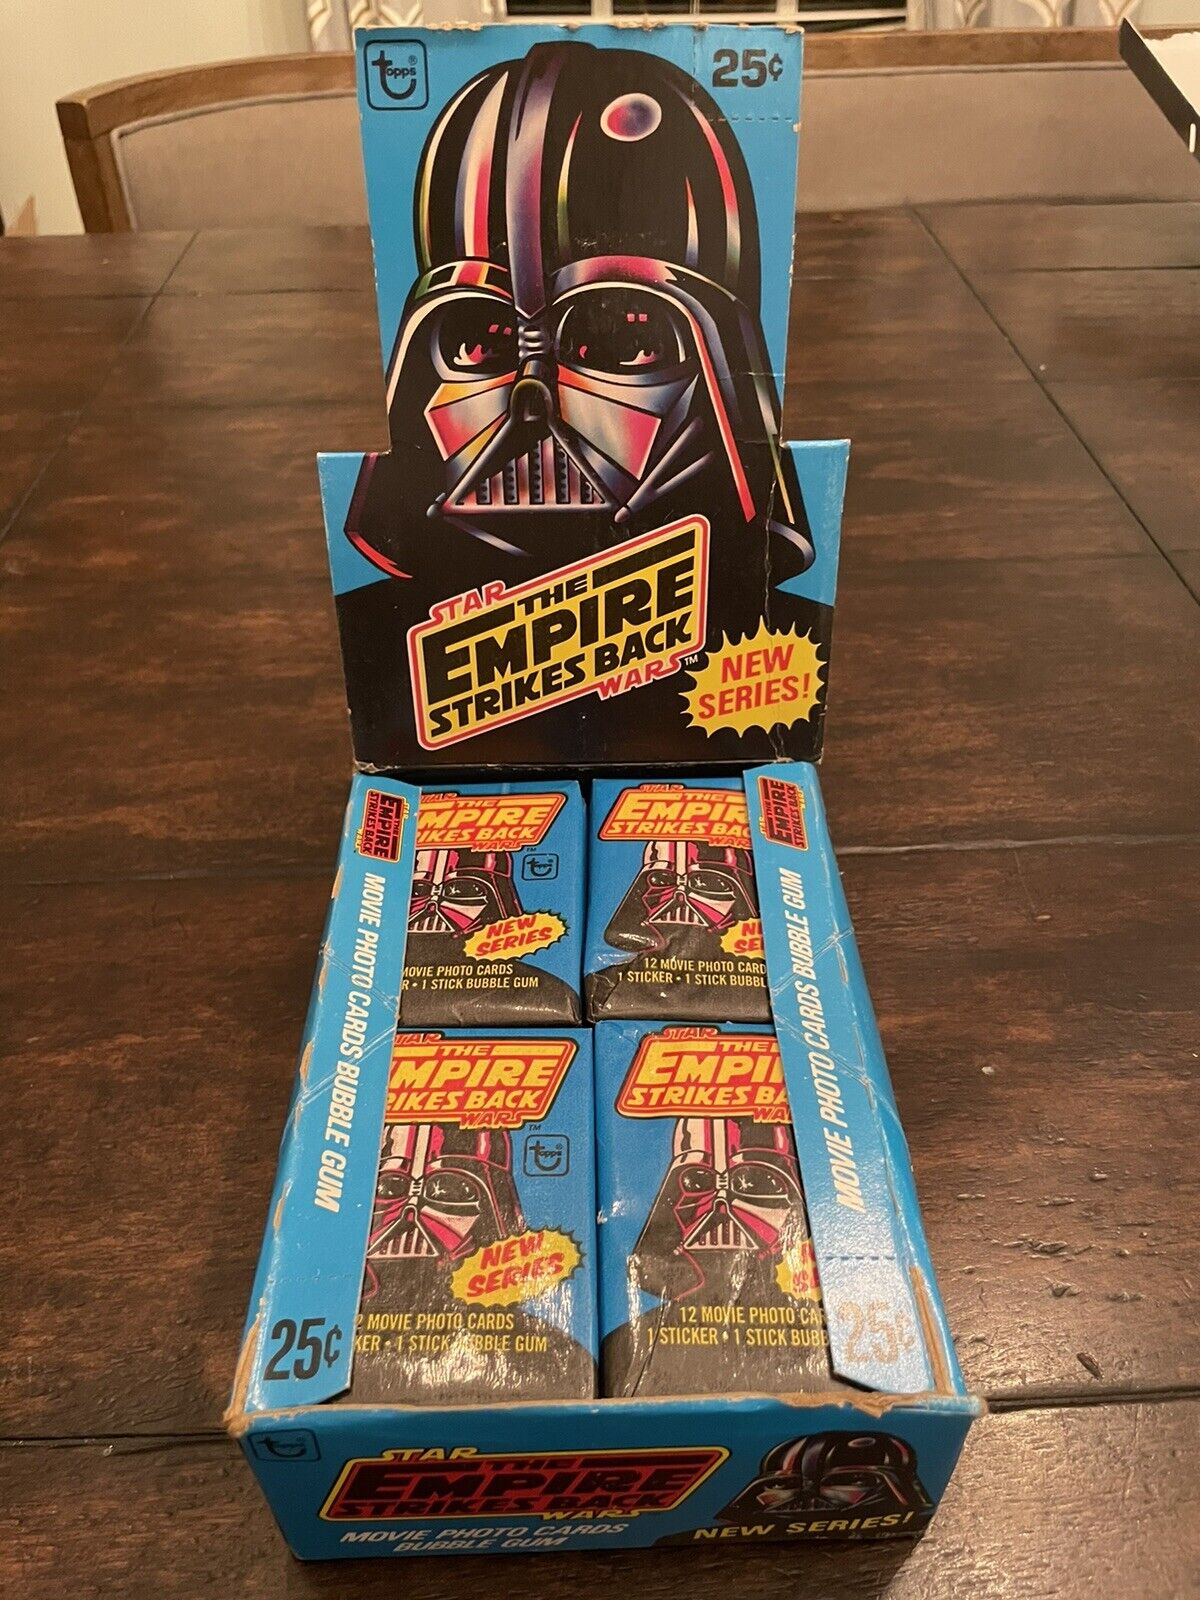 (1) Unopened Sealed Wax Pack 1980 Topps Star Wars EMPIRE STRIKES BACK Series 2